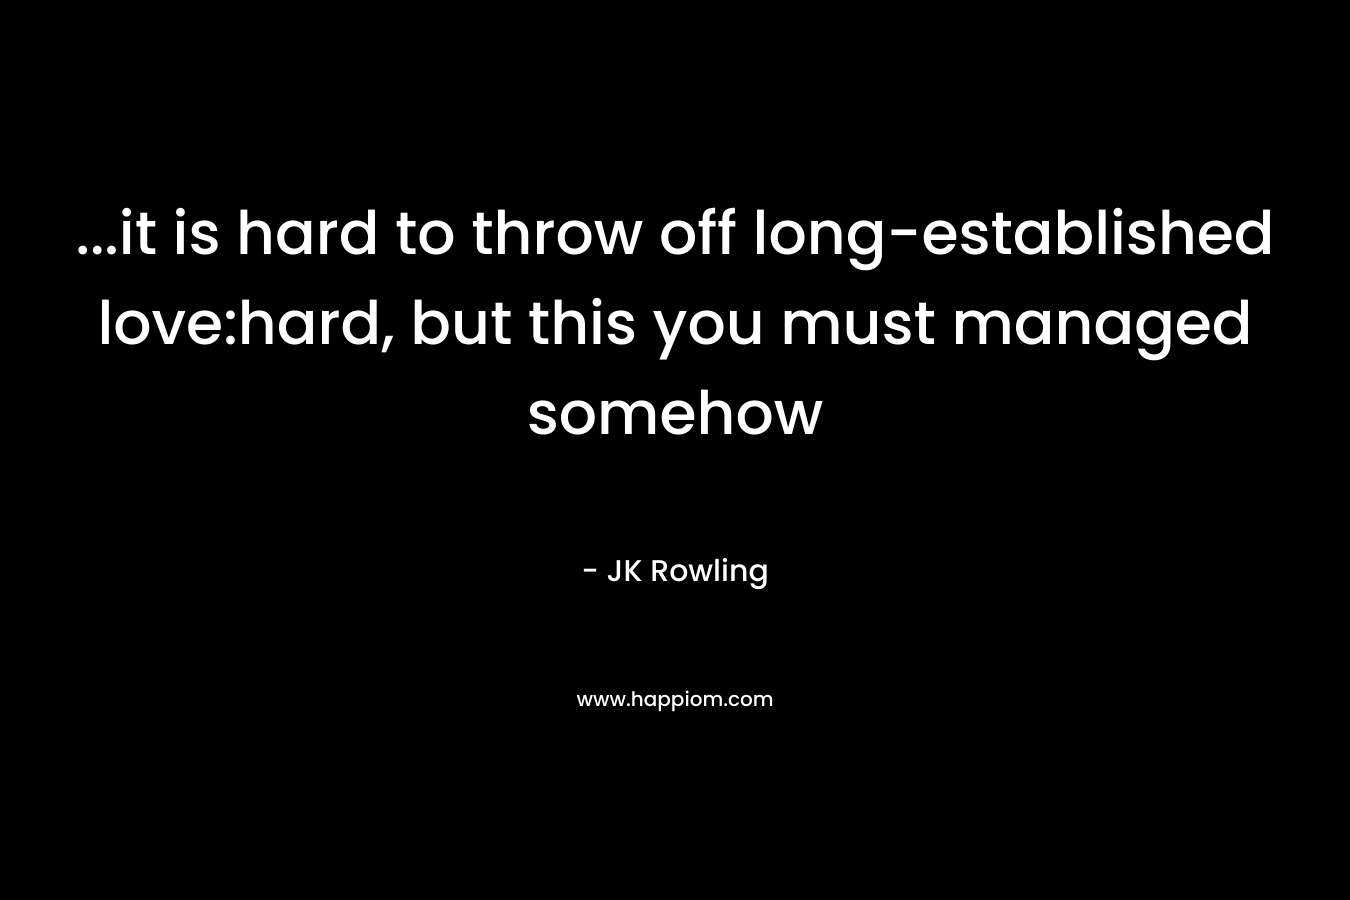 …it is hard to throw off long-established love:hard, but this you must managed somehow – JK Rowling